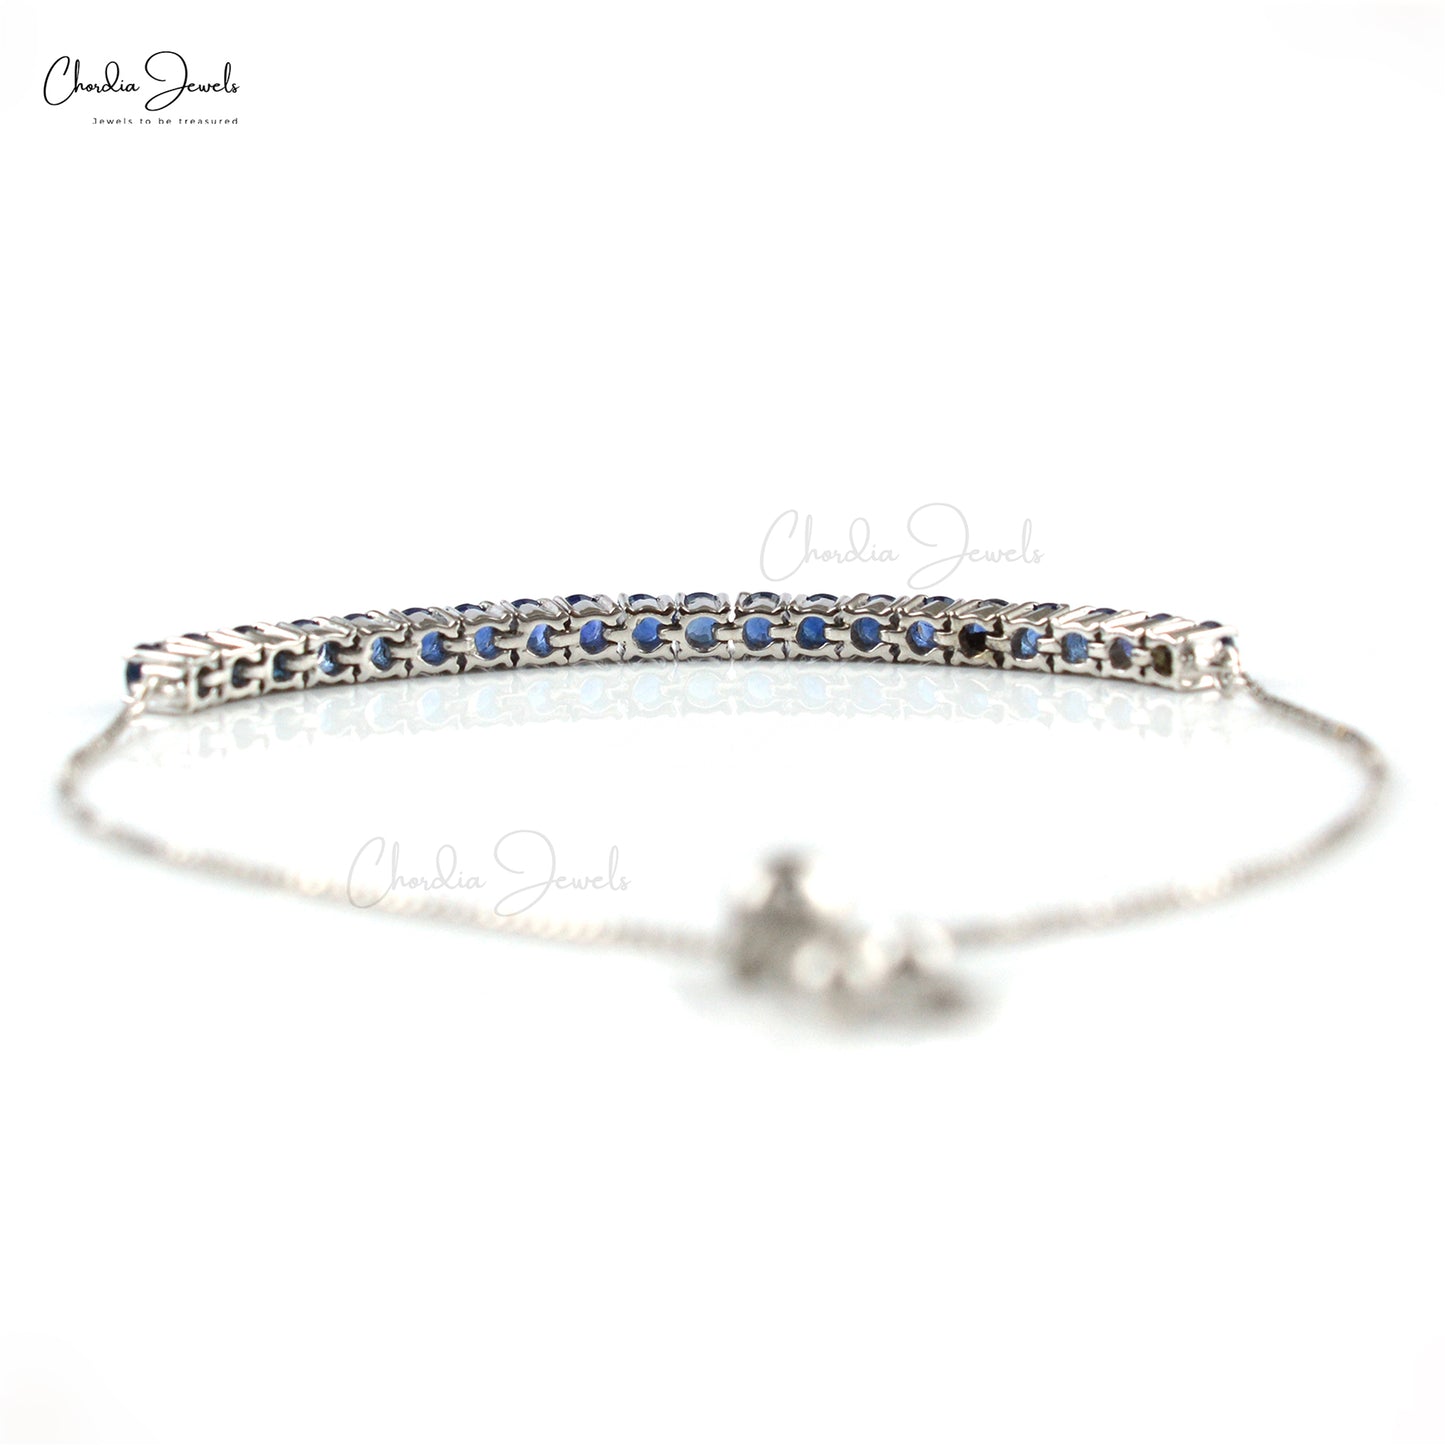 Fine Quality Jewelry 925 Sterling Silver Authentic Blue Sapphire Tennis Bracelet September Birthstone Jewelry At Reasonable Price